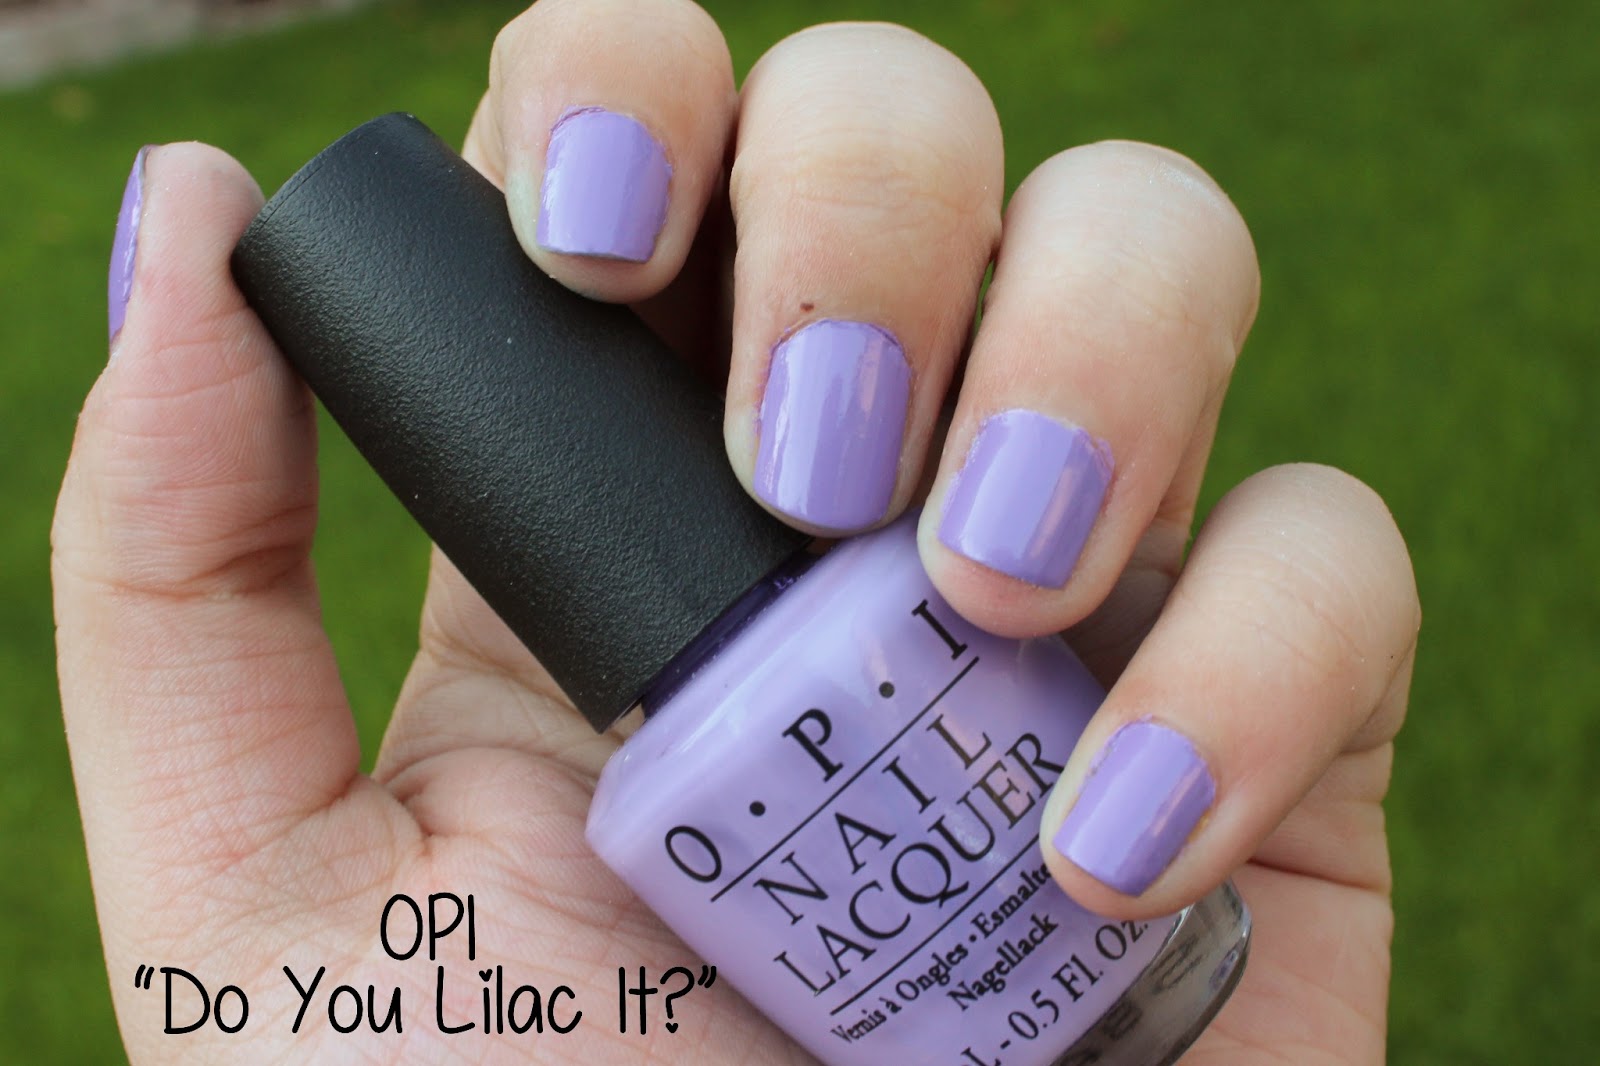 1. OPI Nail Lacquer in "Do You Lilac It?" - wide 3